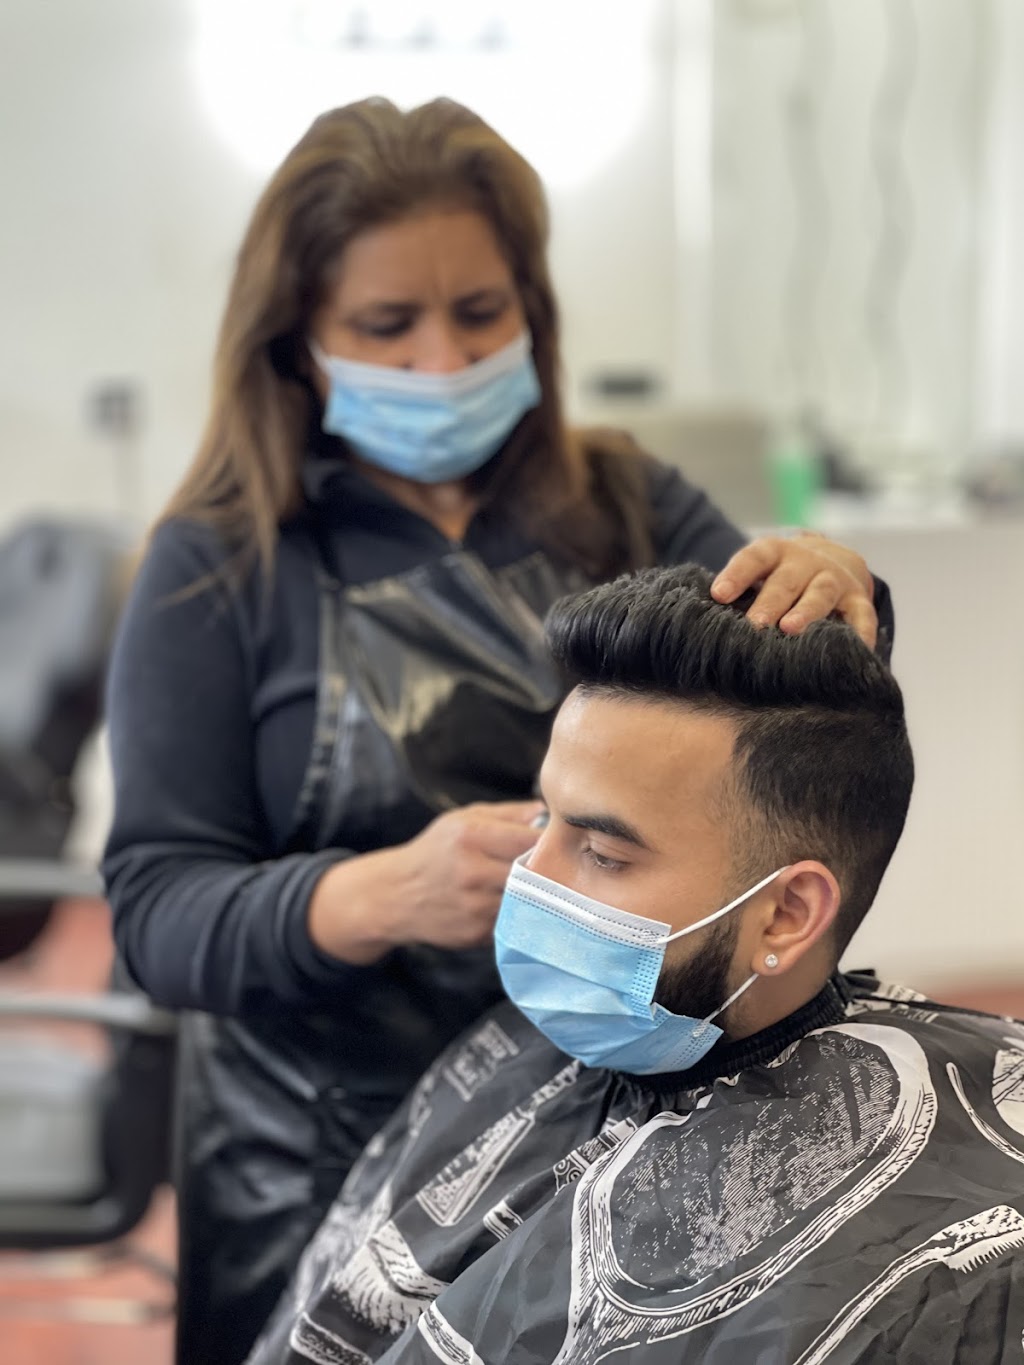 Styles N Smiles Barber & Hairstylist | 1679 128th St, Surrey, BC V4A 3V2, Canada | Phone: (604) 536-8820